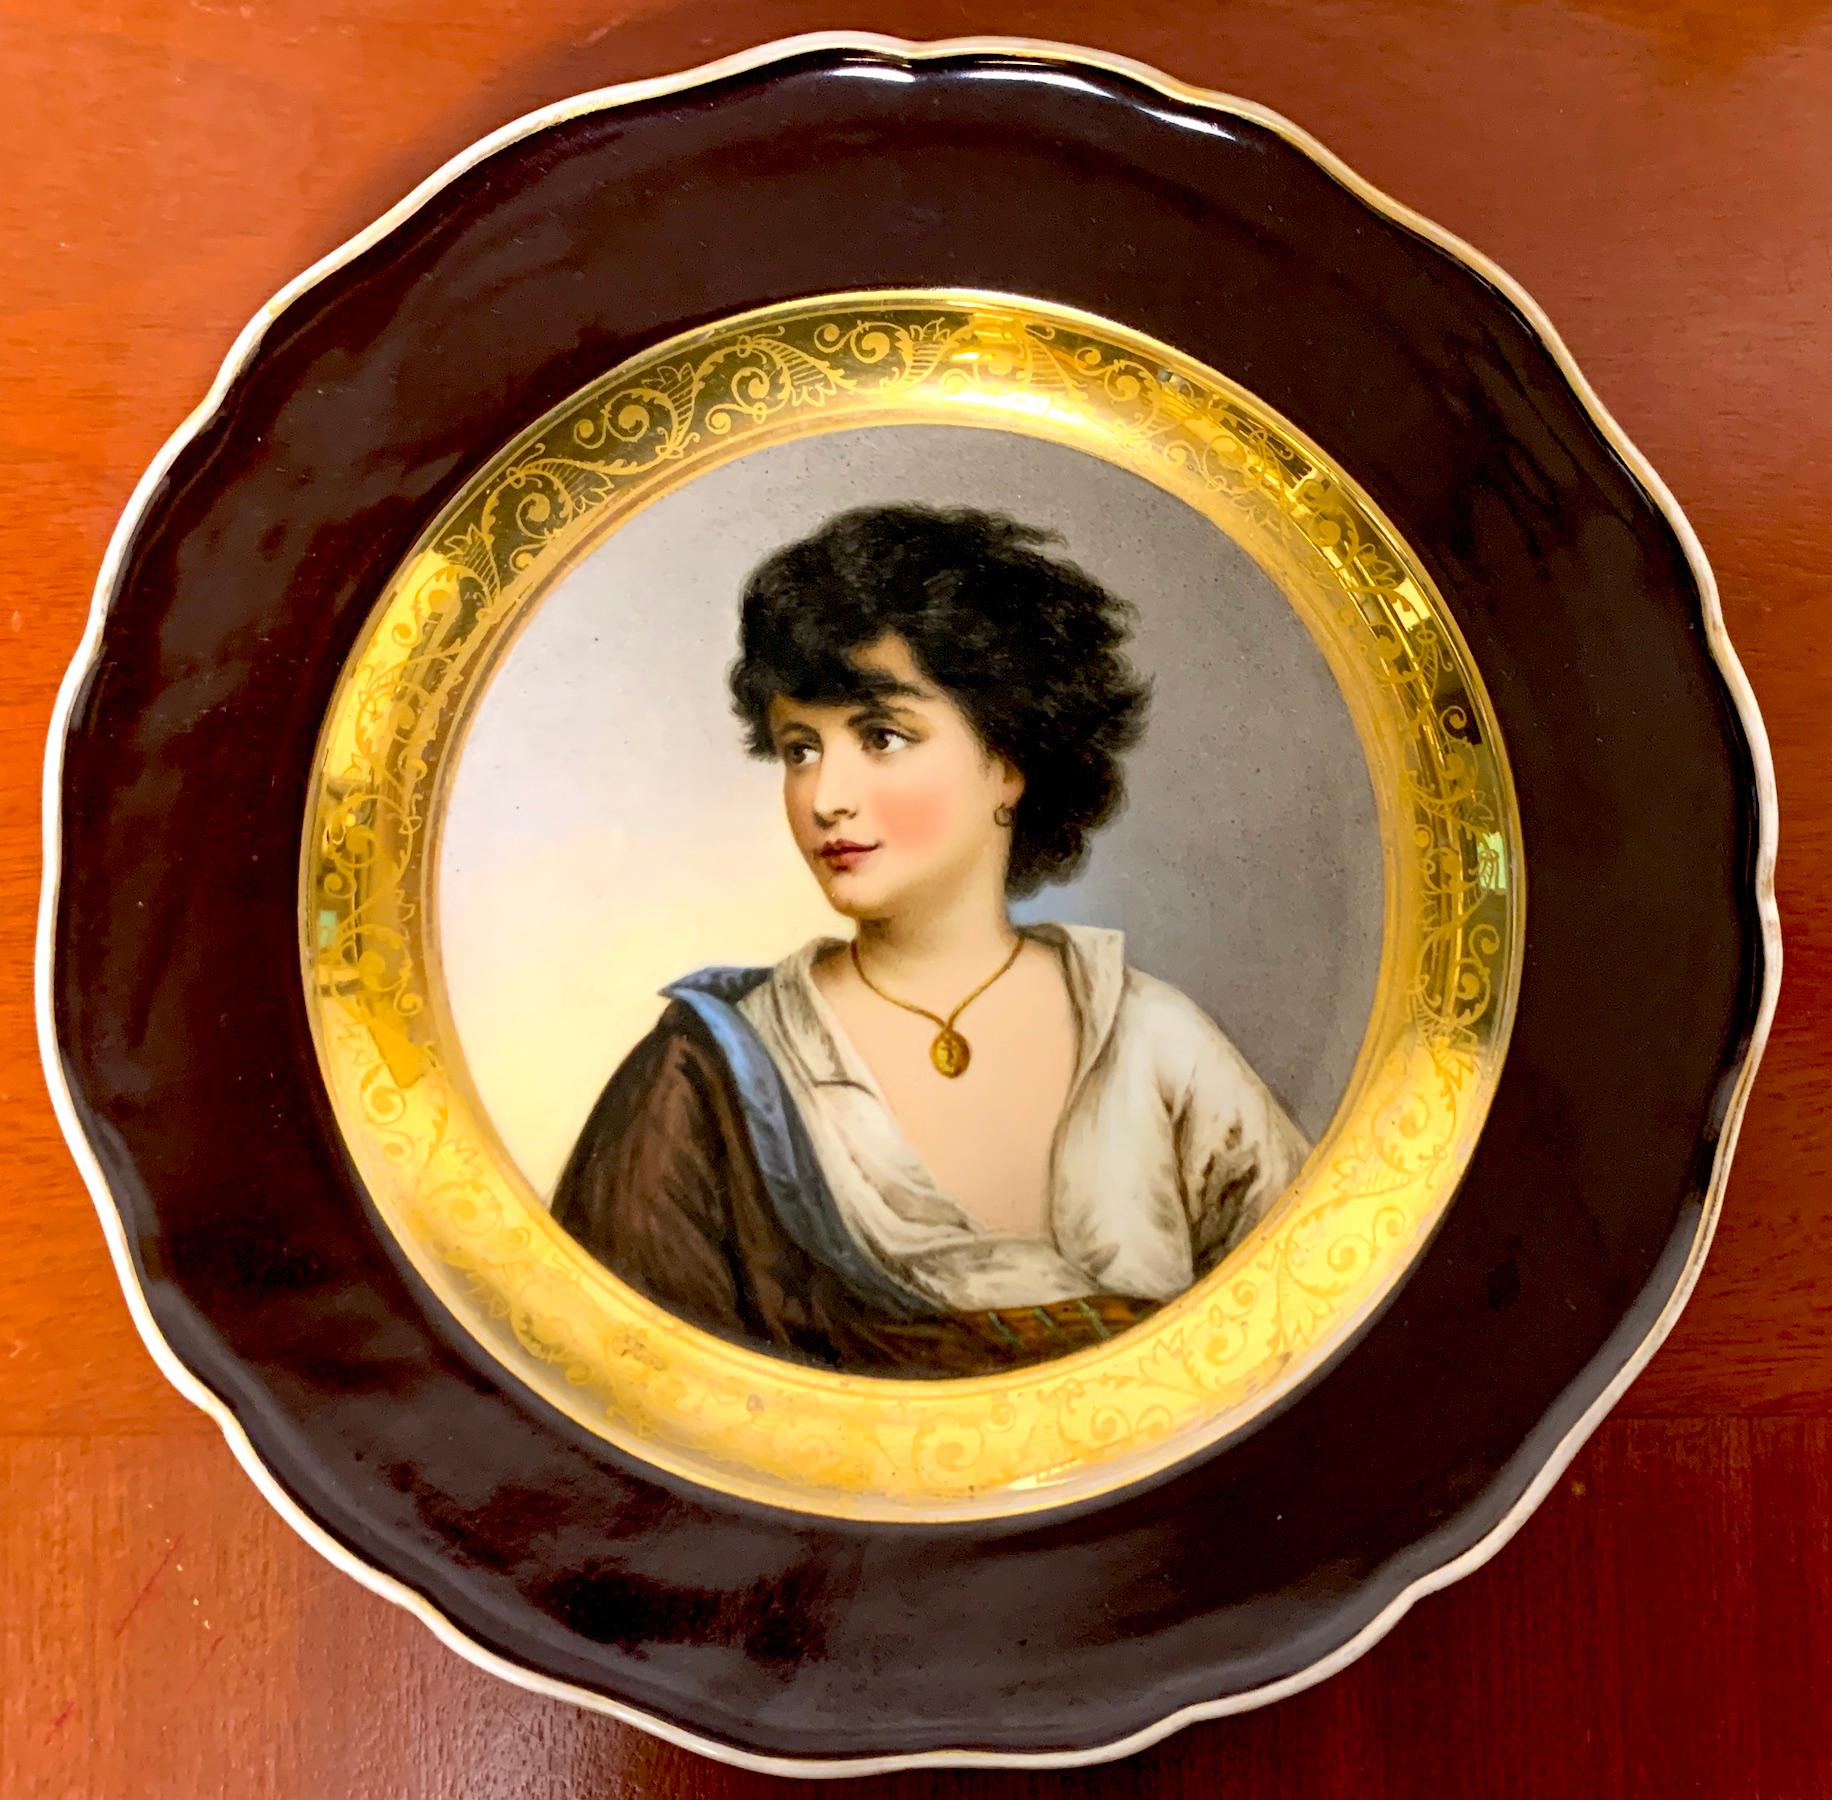 19th Century Meissen Portrait Plate of Young Girl With Necklace, With wide painted/ enamelled bronze edge with, gilt decorated surround, the well painted center portrait of a neoclassical beauty. Marked with blue underglaze crossed swords and